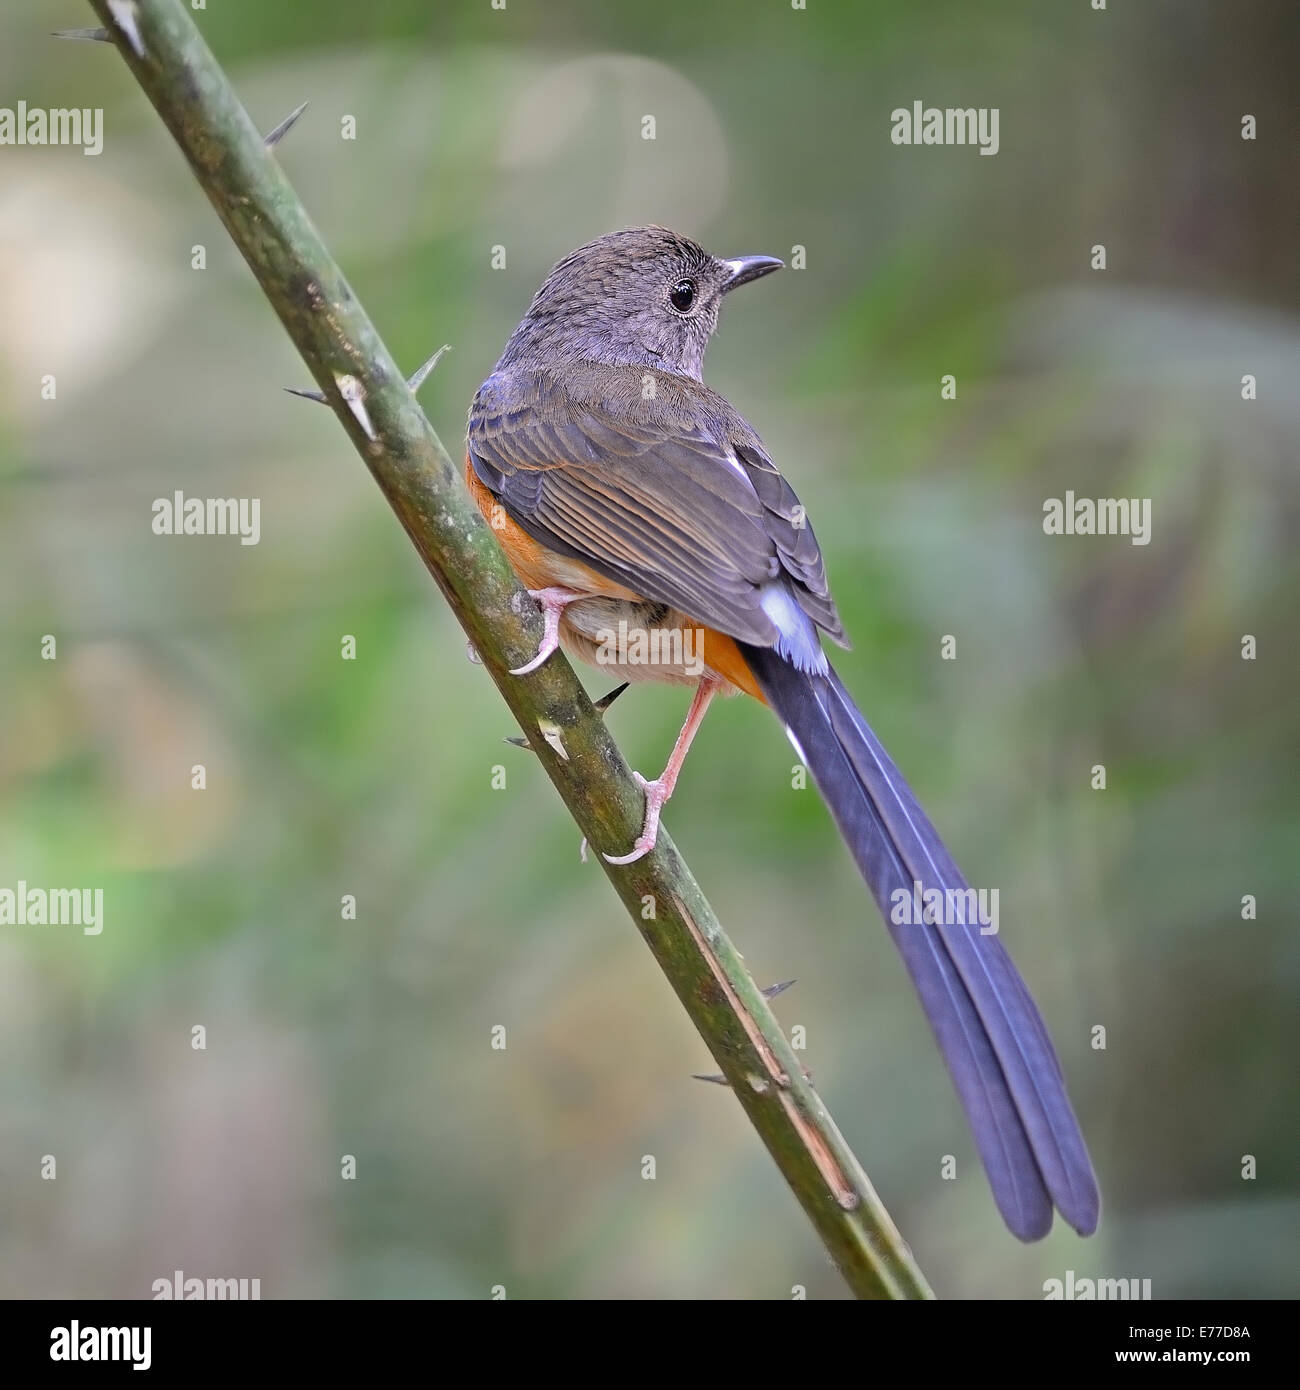 Beautiful song bird, female White-rumped Shama (Copsychus malabaricus), standing on a branch, back profile Stock Photo